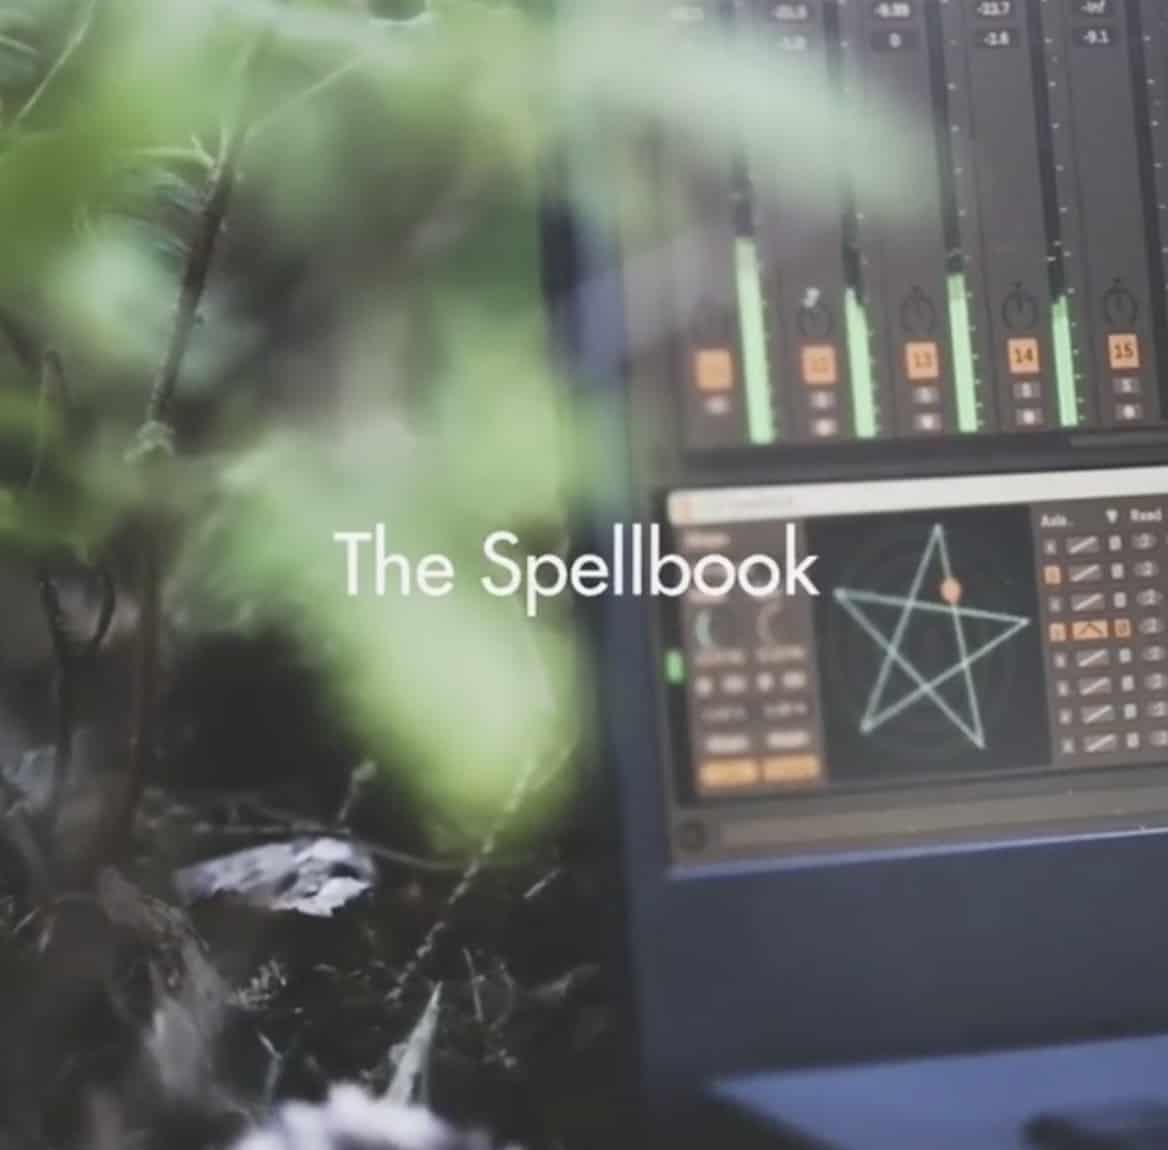 The Spellbook – Sacred modulations for Ableton Max users